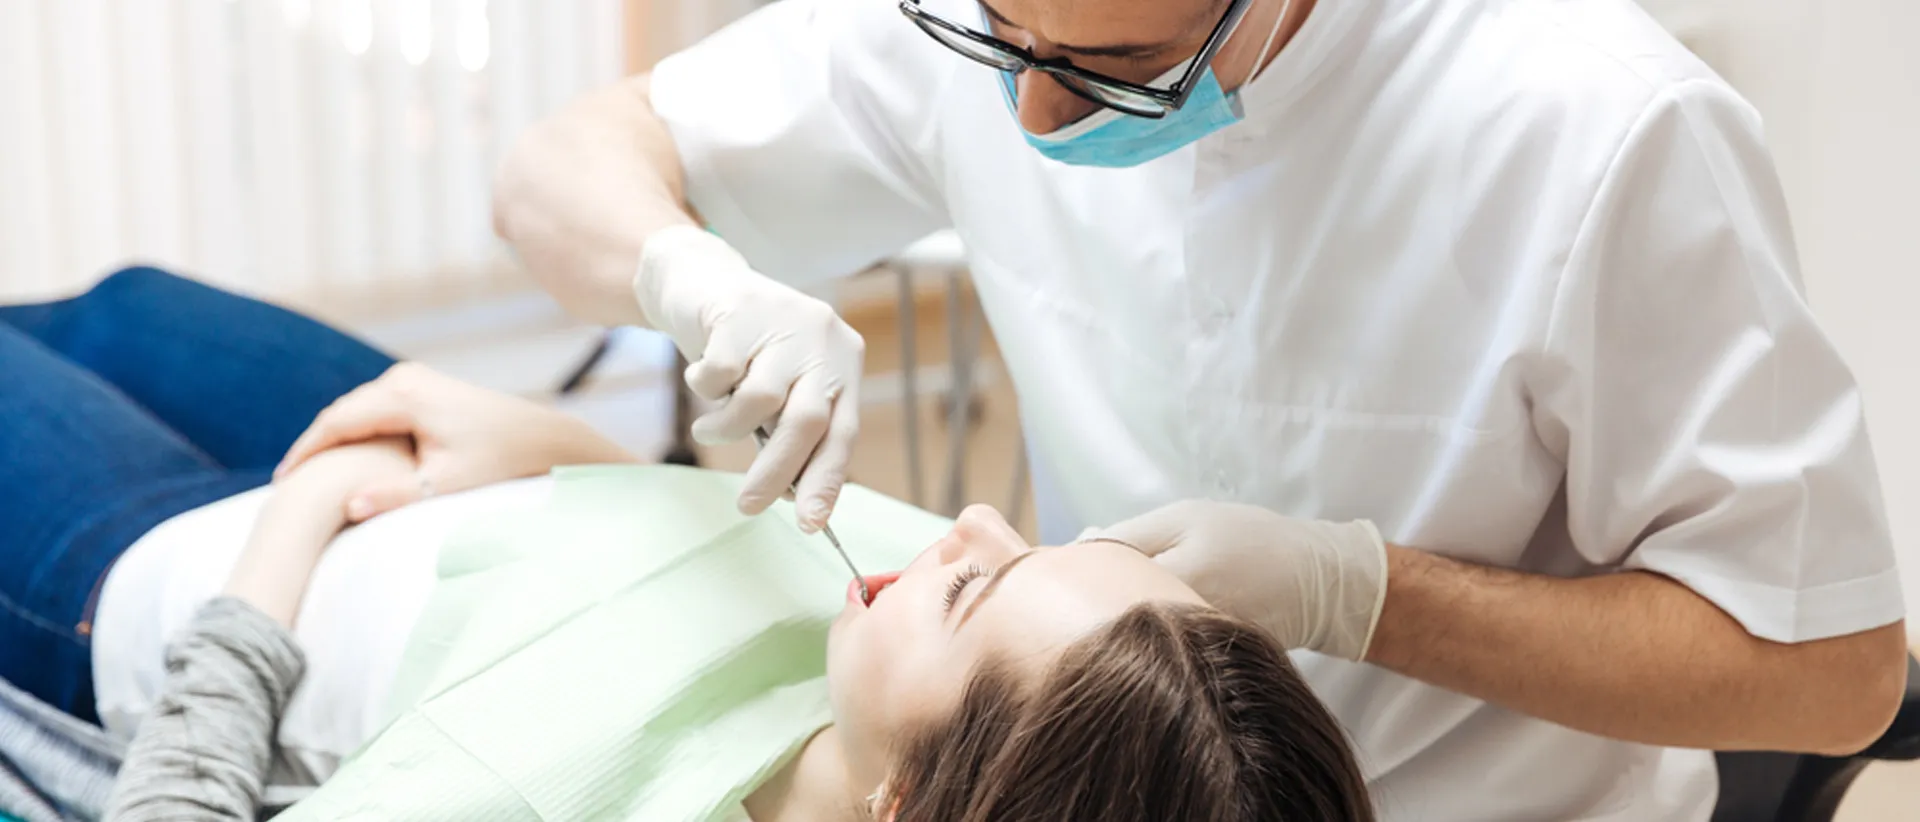 A dentist examining a patient at a dental care clinic.
